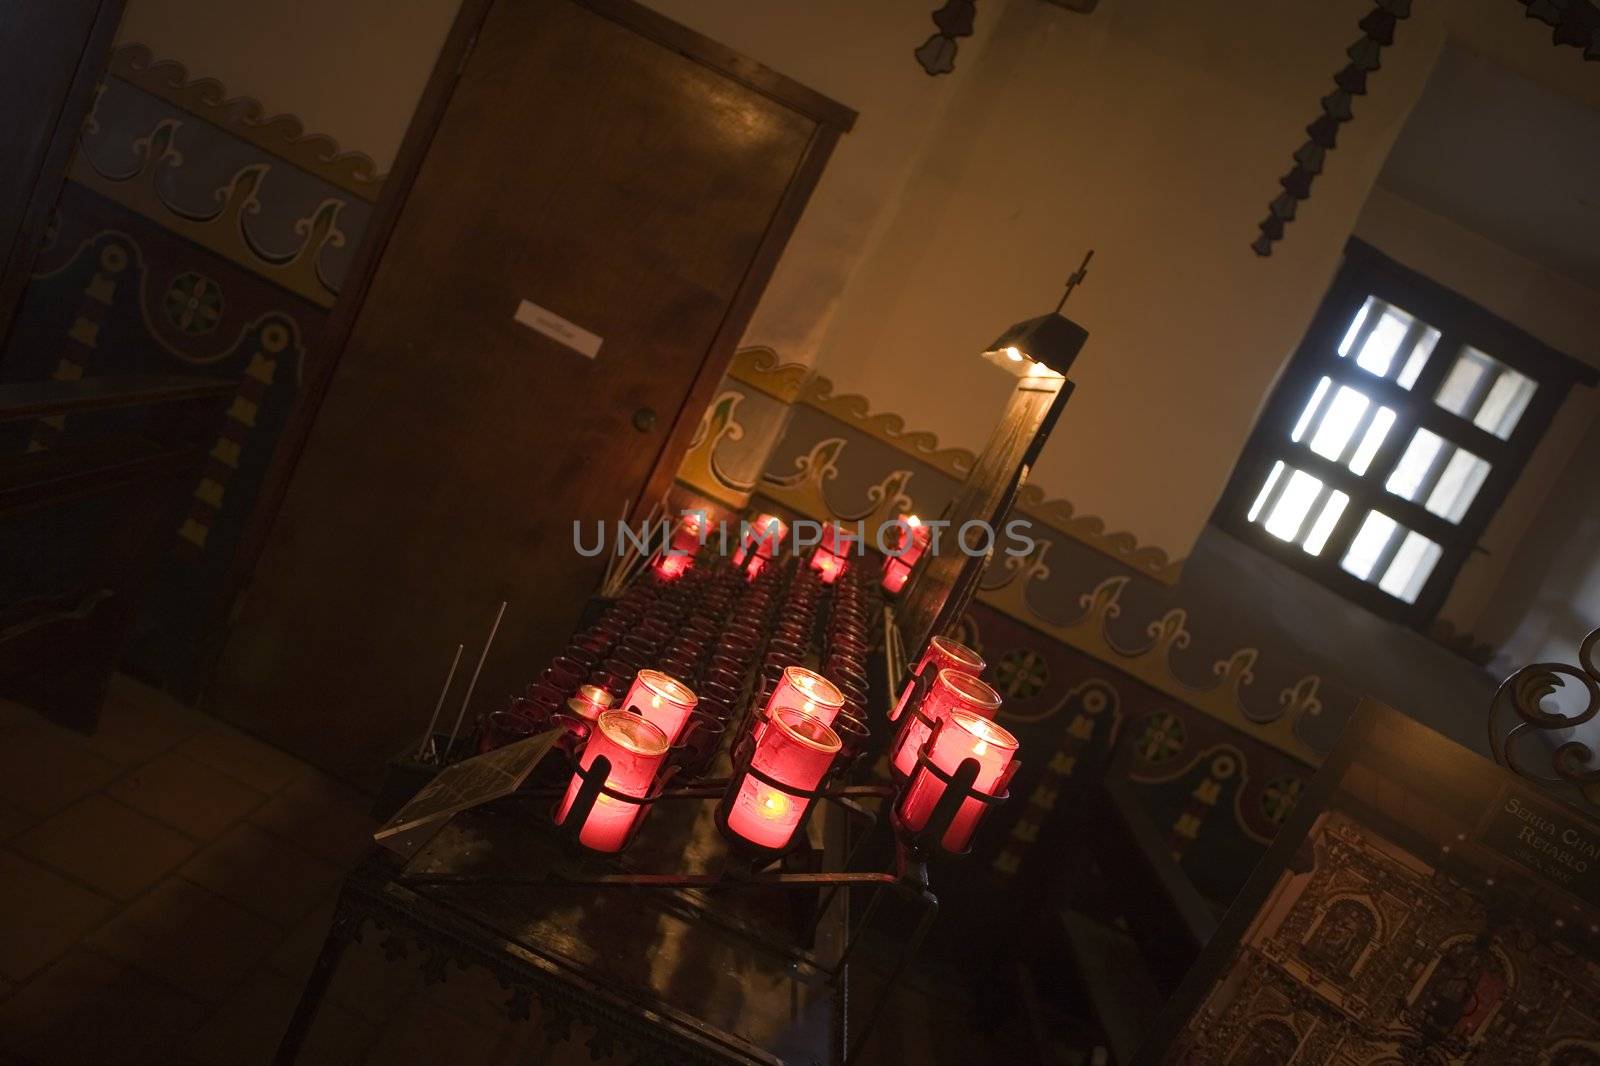 Candles and Pew at Mission San Juan Capistrano by KevinPanizza